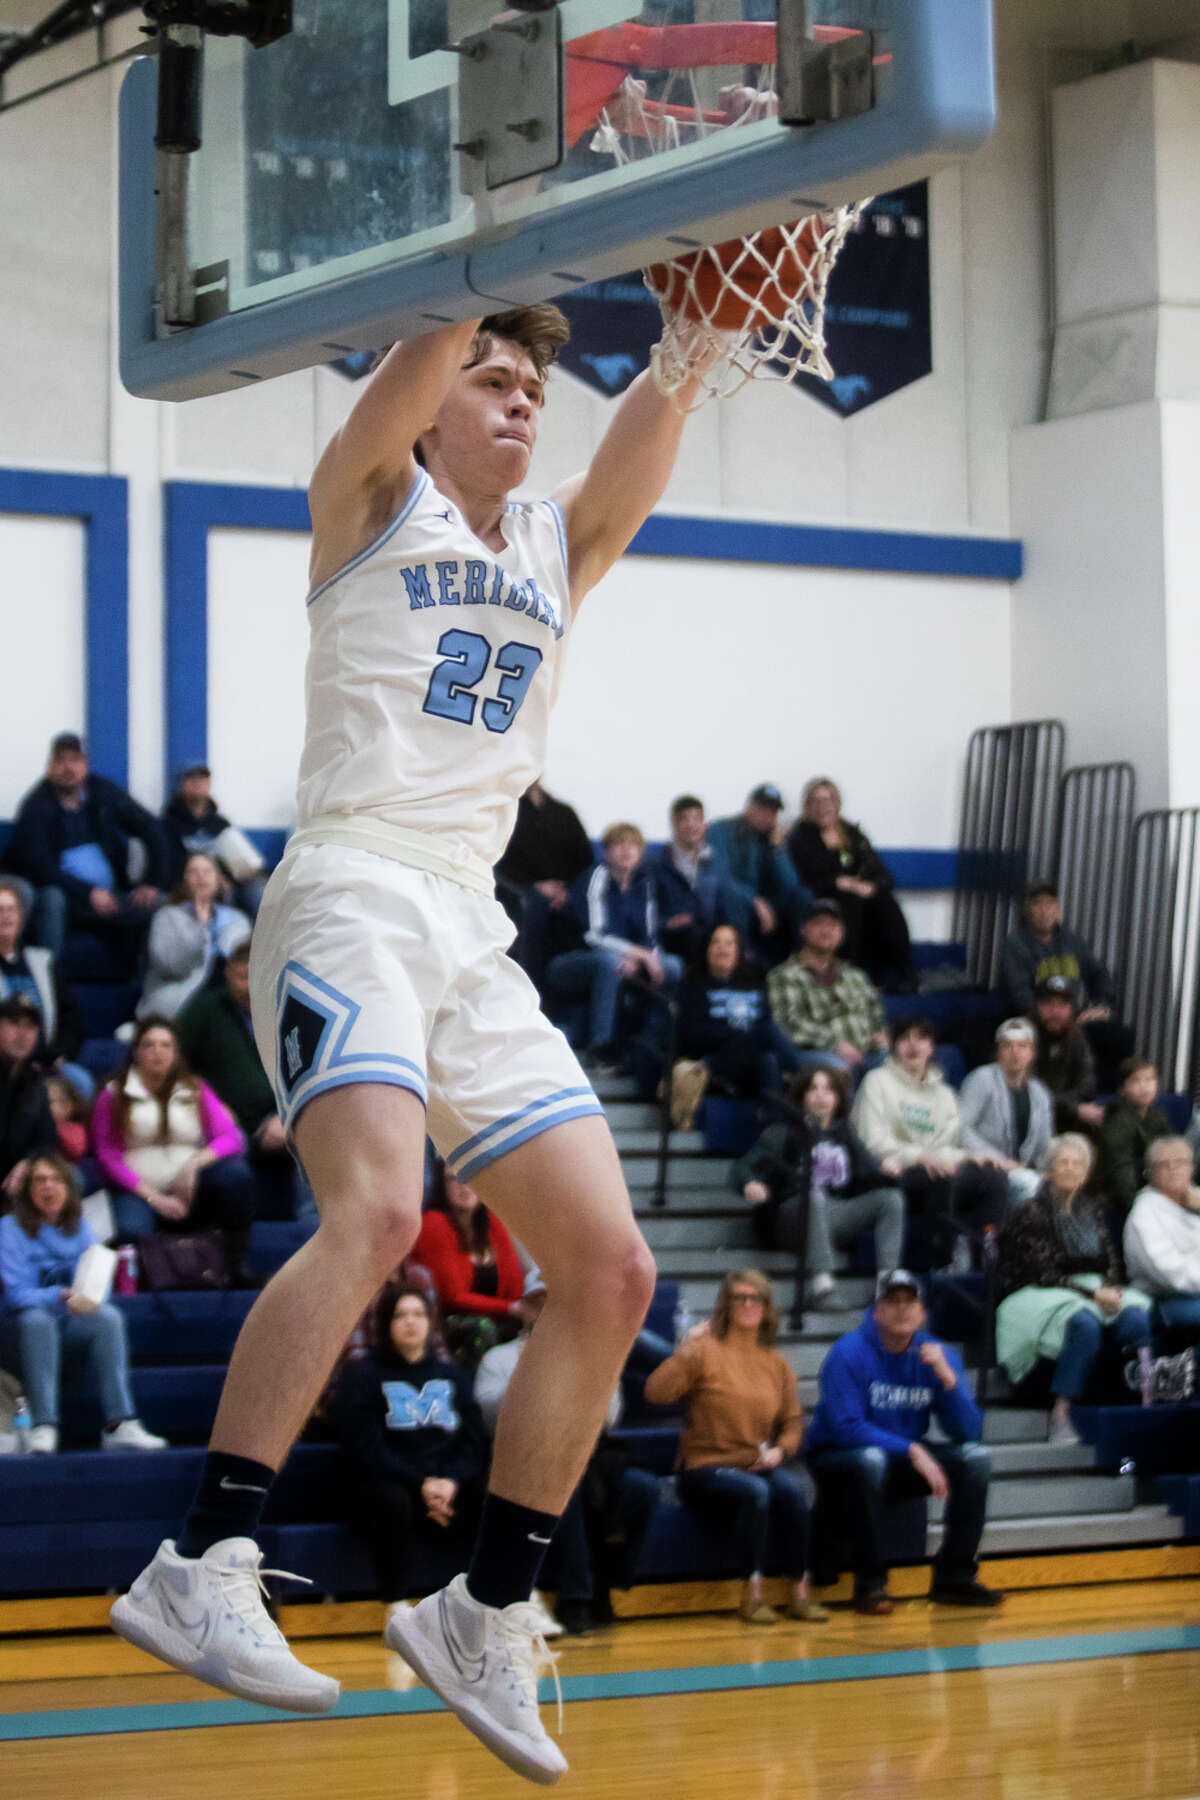 Meridian's Sawyer Moloy dunks the ball during a Dec. 21, 2021 game against Bullock Creek.